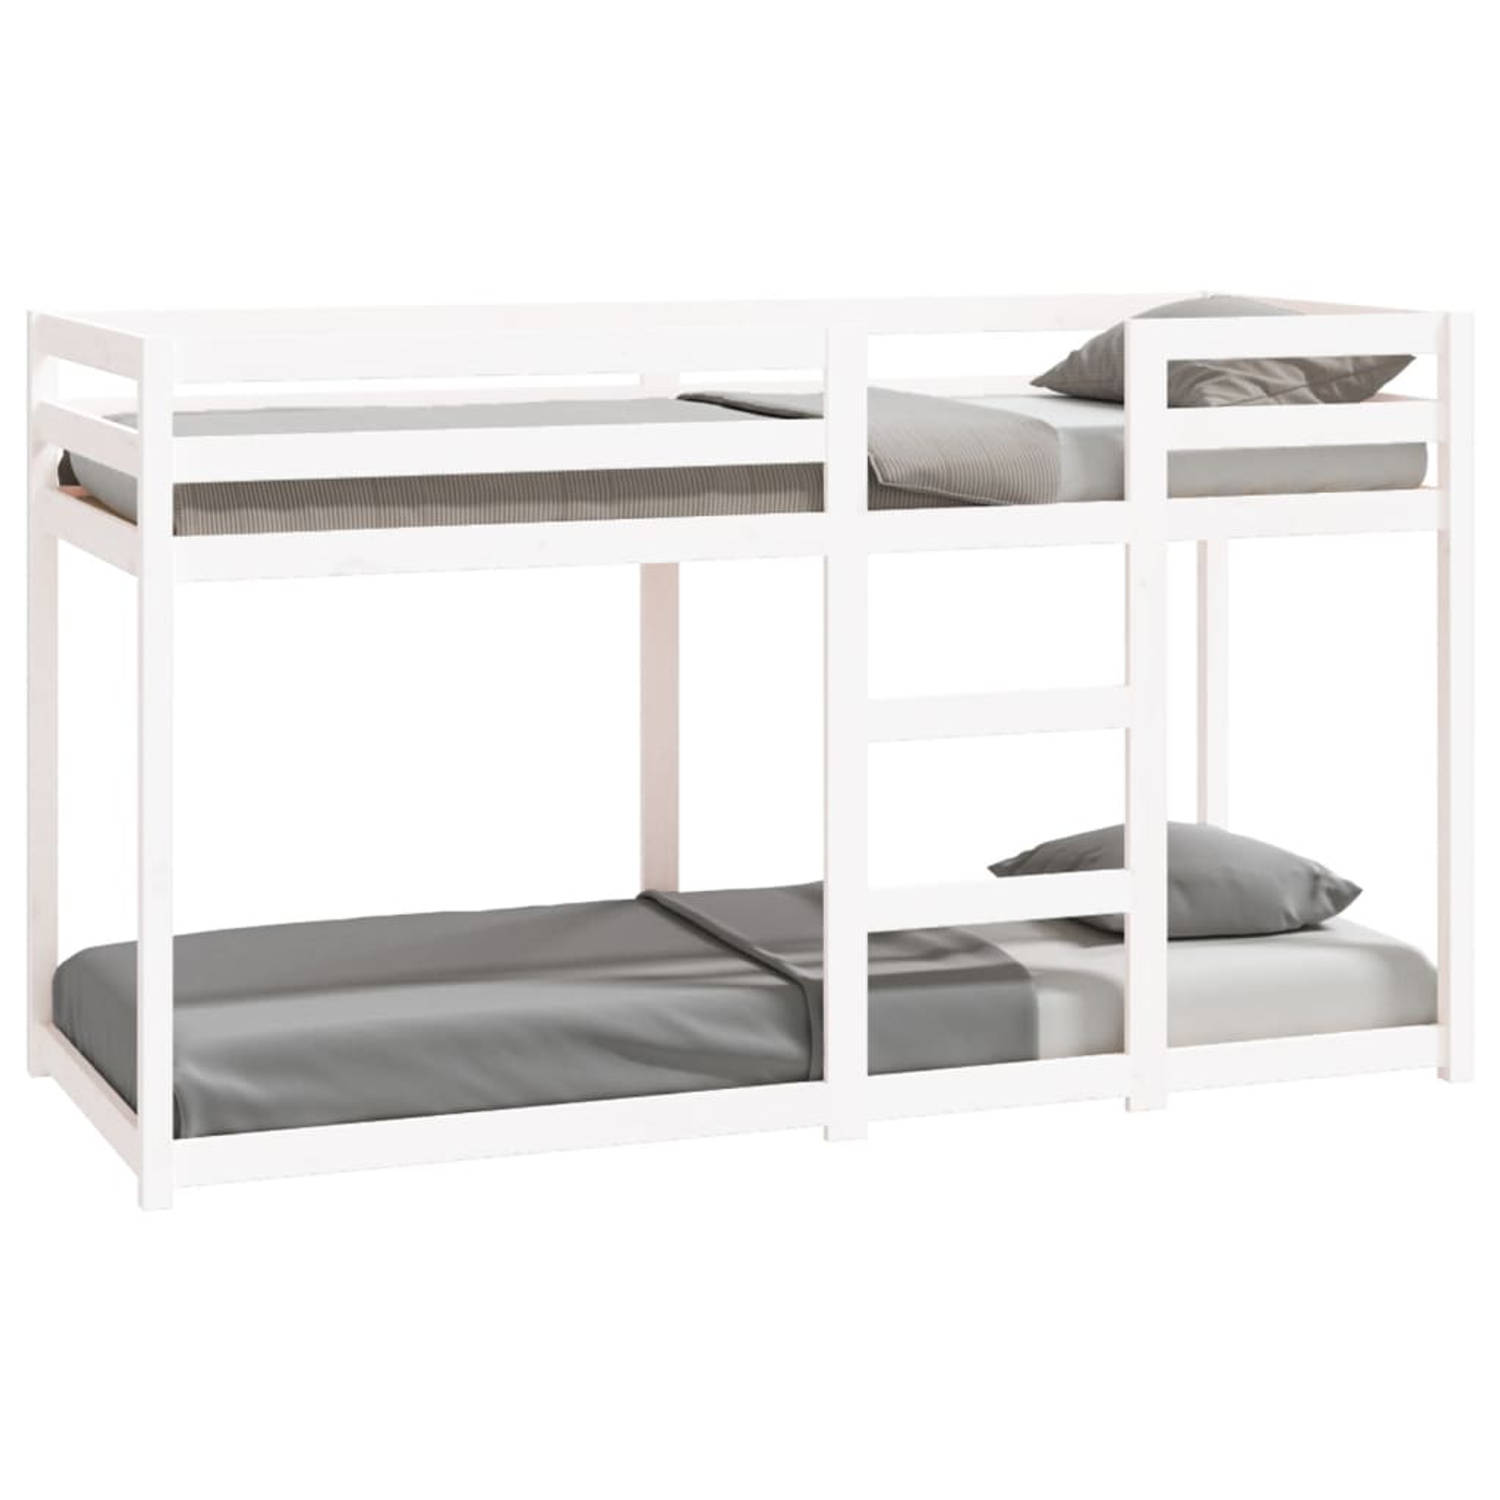 The Living Store Stapelbed 75x190 cm massief grenenhout wit - Stapelbed - Stapelbedden - Bed - Bedframe - Stapelbedframe - Bed Frame - Bedden - Bedframes - Stapelbedframes - Bed Fr